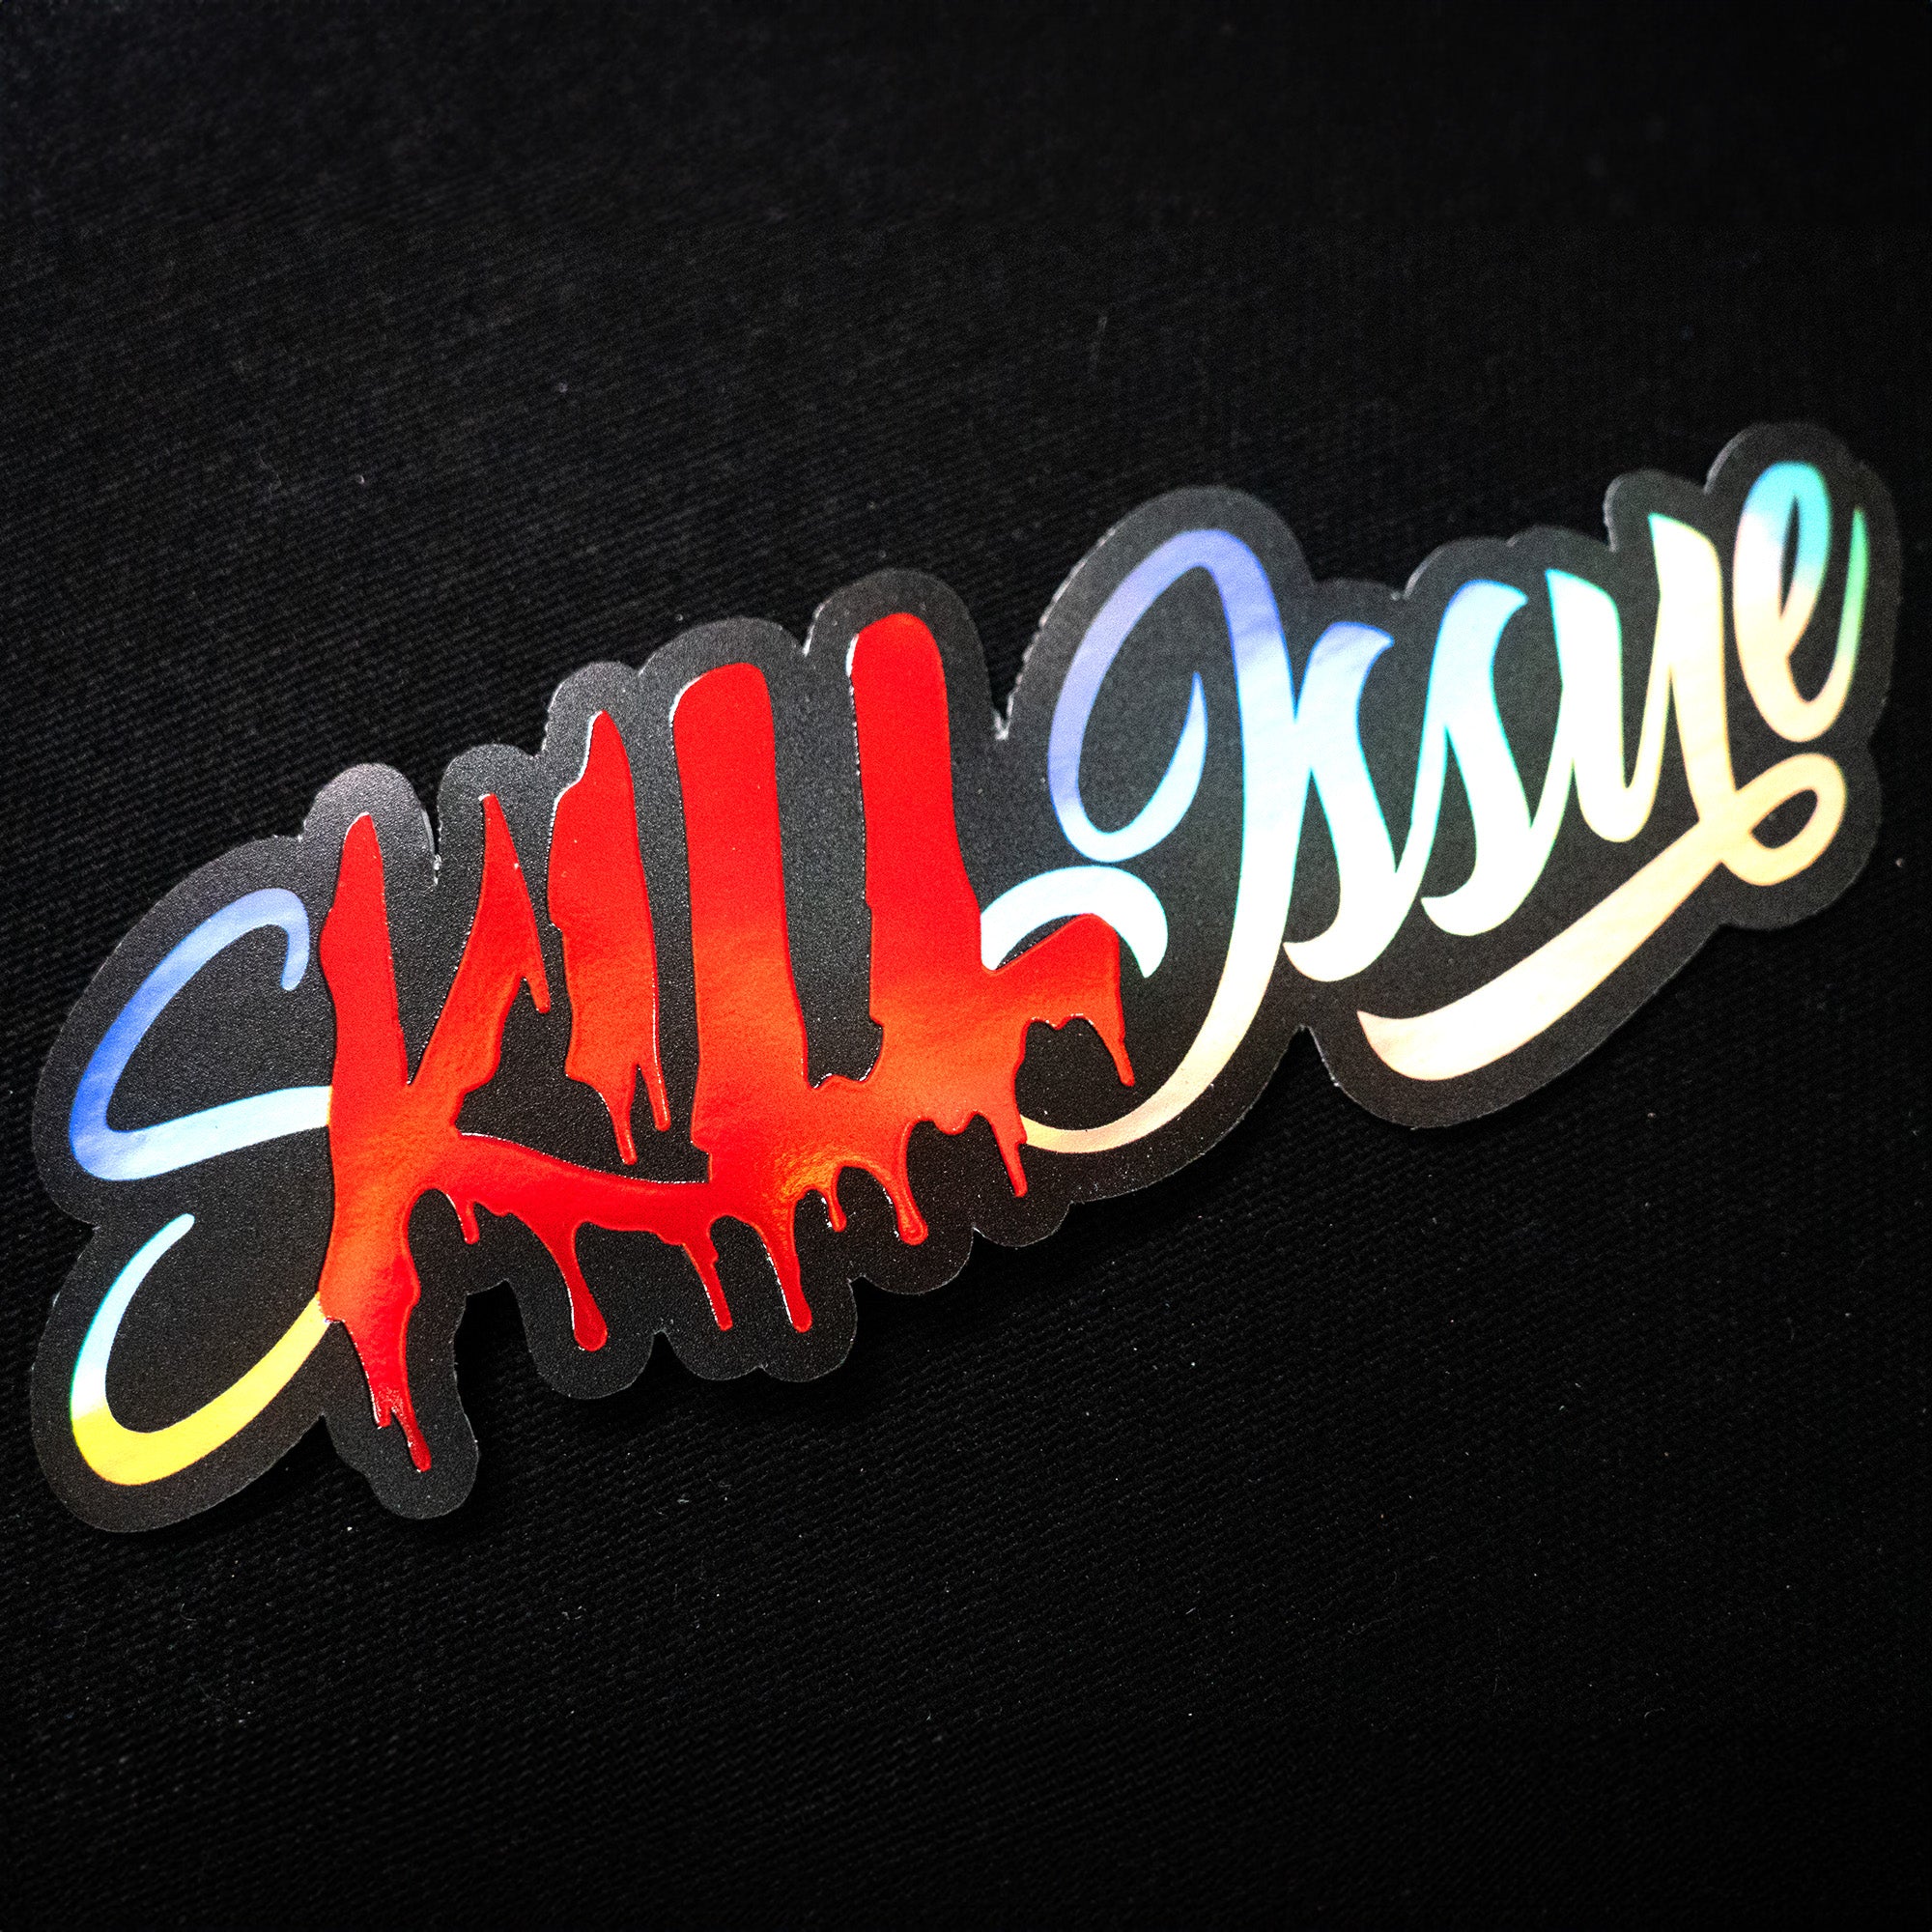 &quot;sKILL issue&quot; Holo Sticker